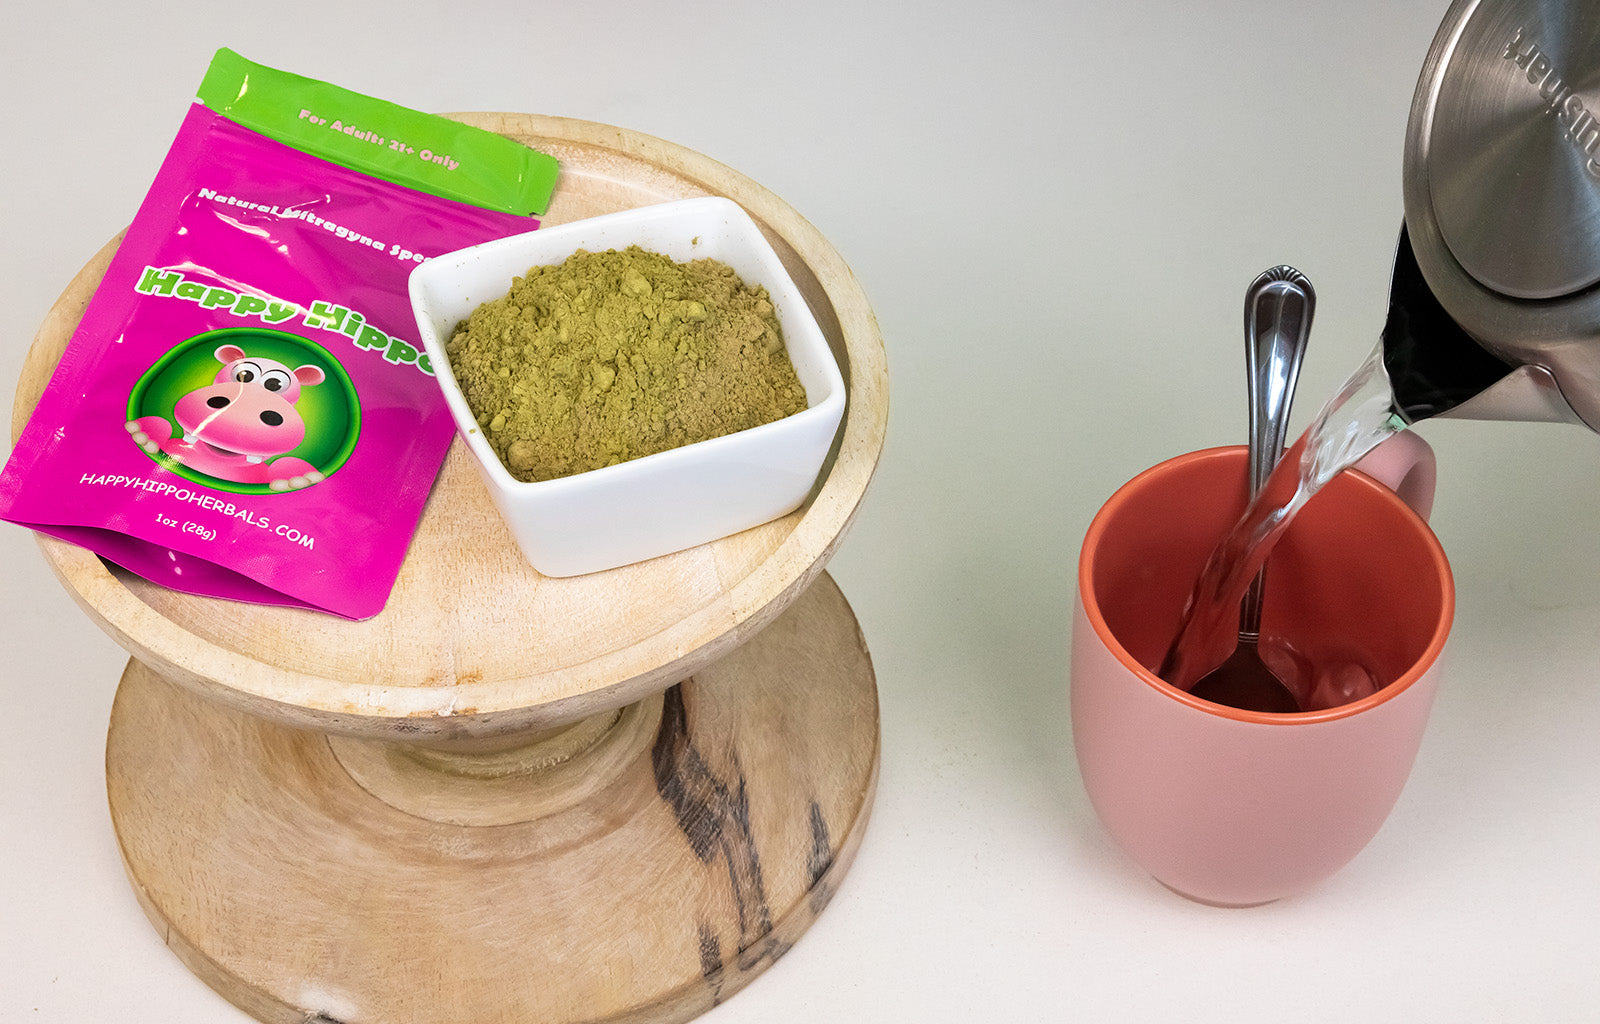 Featured image depicting a small wooden table, atop which sits a packet of Happy Hippo brand White Borneo Kratom Powder. Next to the small wooden table, is a pink teacup being filled with hot water from a steel kettle.